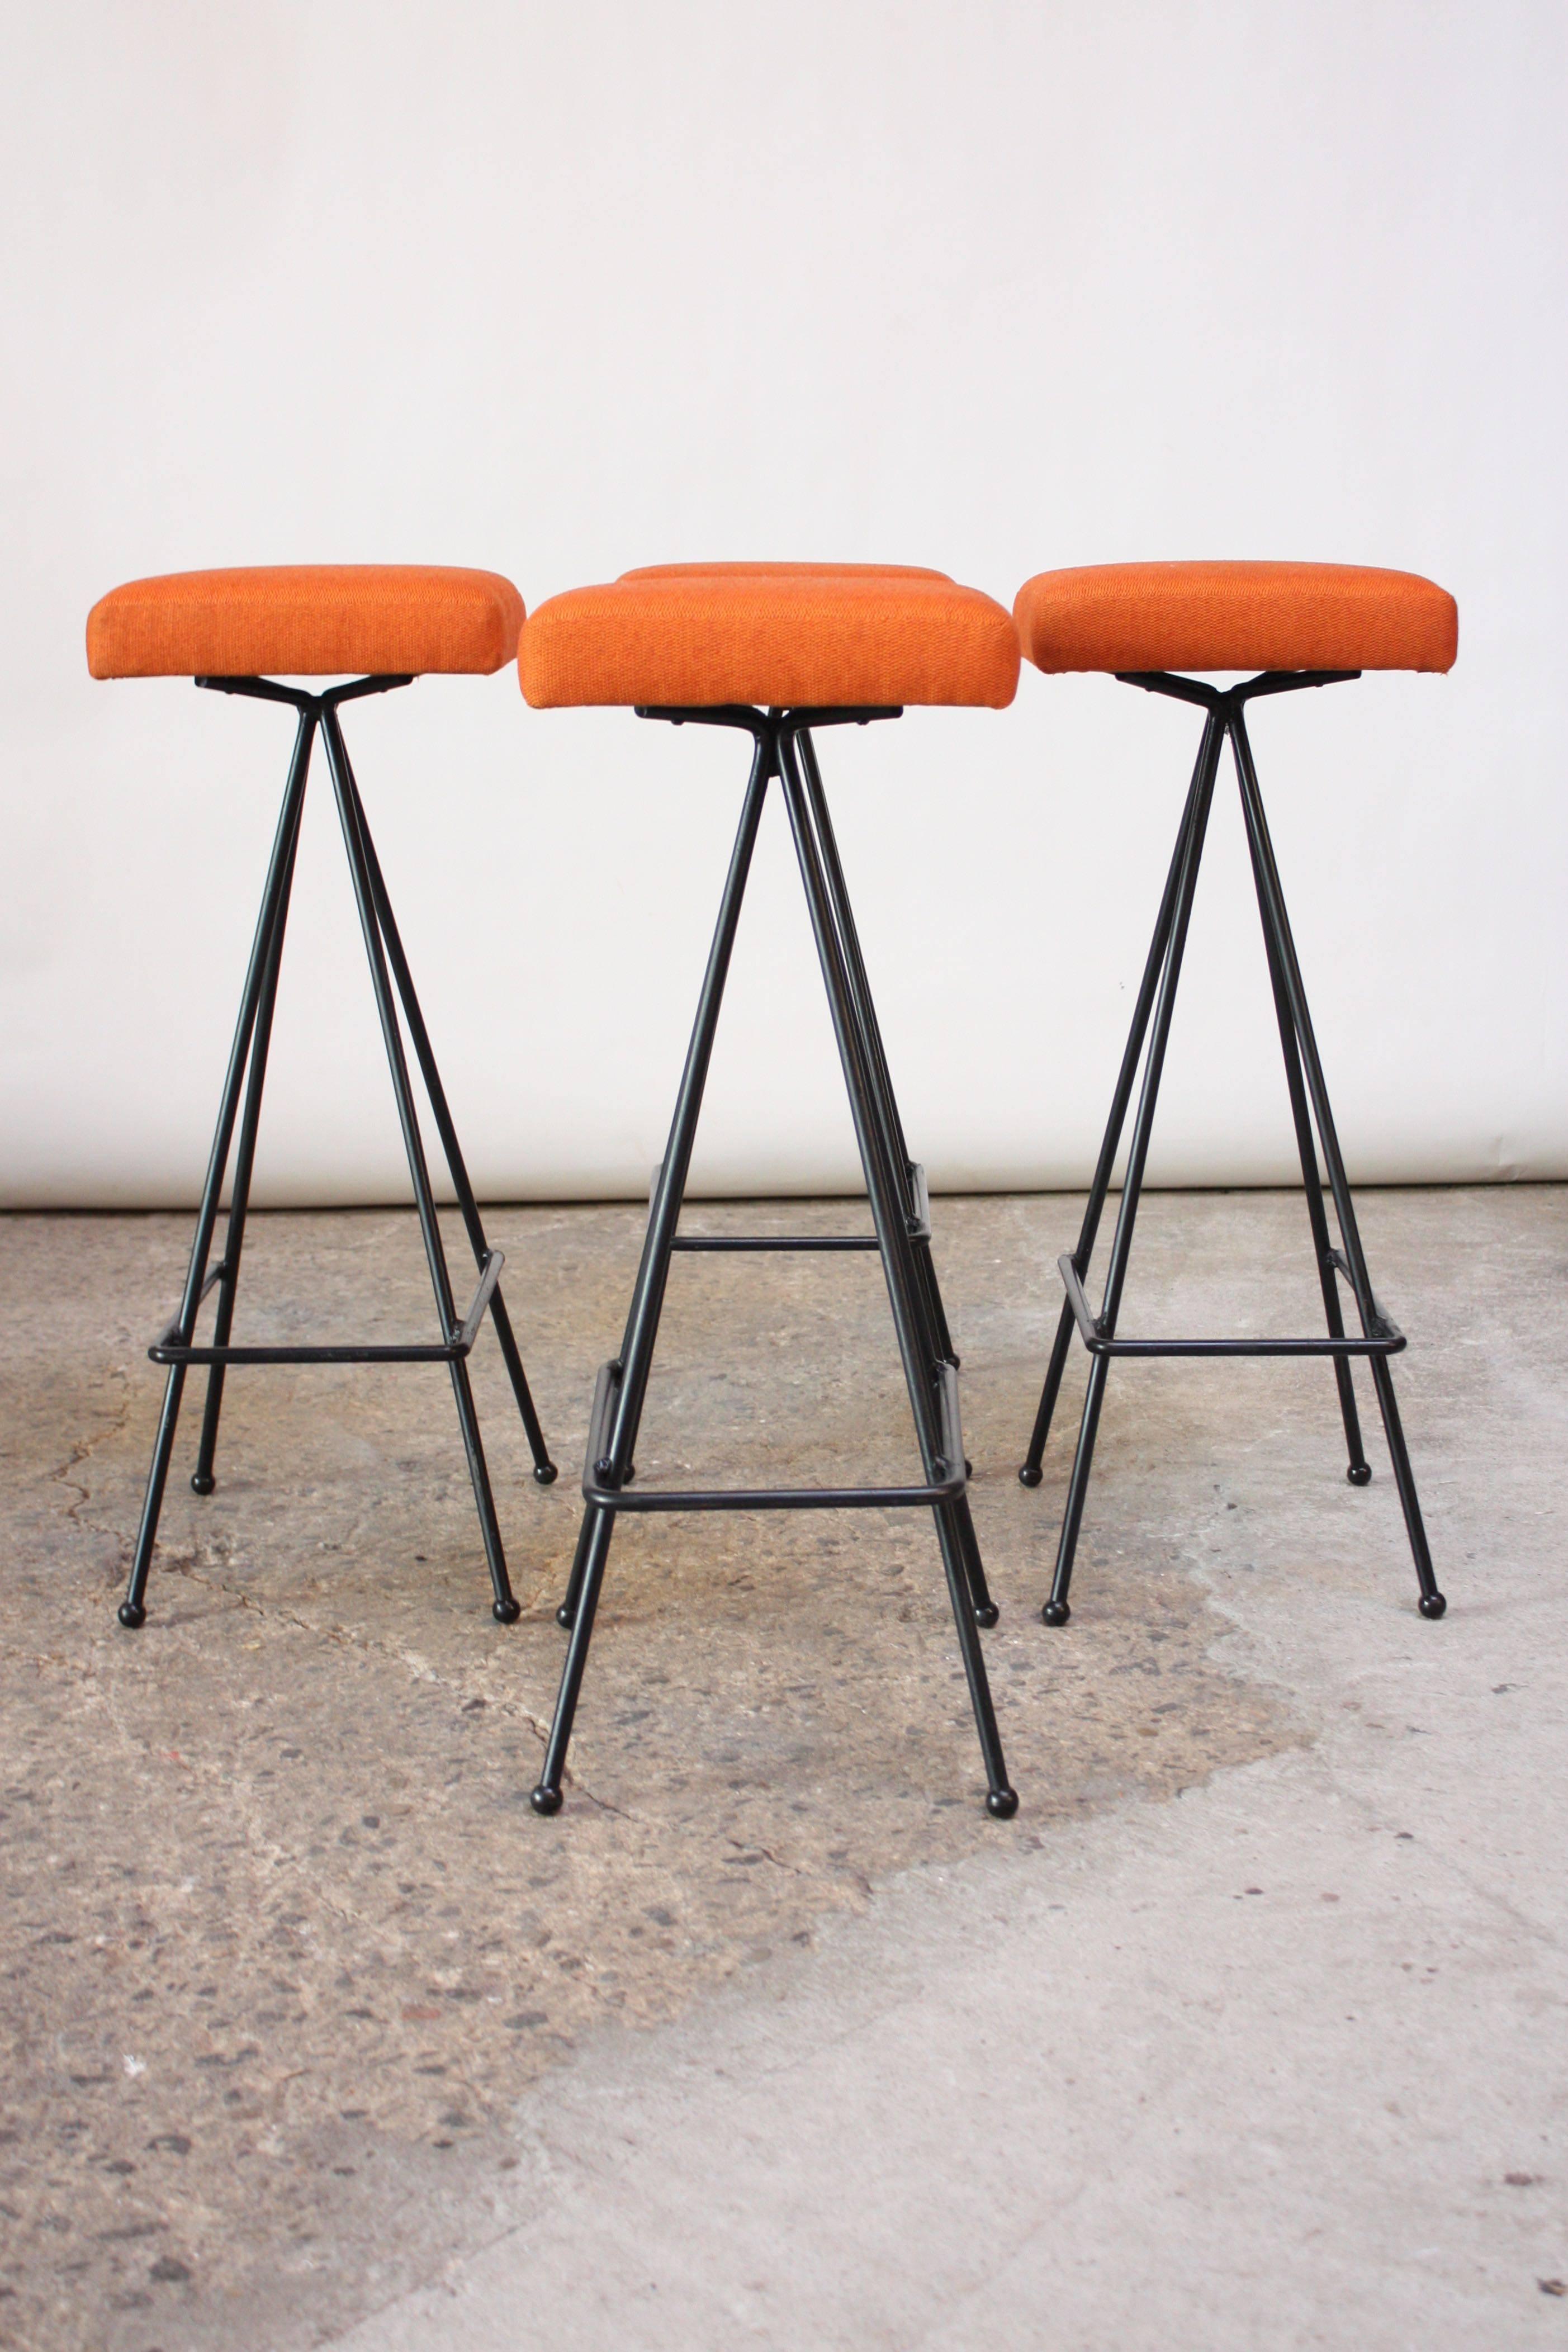 Rare, early set of #11 barstools designed by Adrian Pearsall for Craft Associates in the 1950s. Forged wrought iron construction with footrest and ball feet. Newly recovered in a vintage hopsack fabric. Retain the 'Craft Associates' tags to the